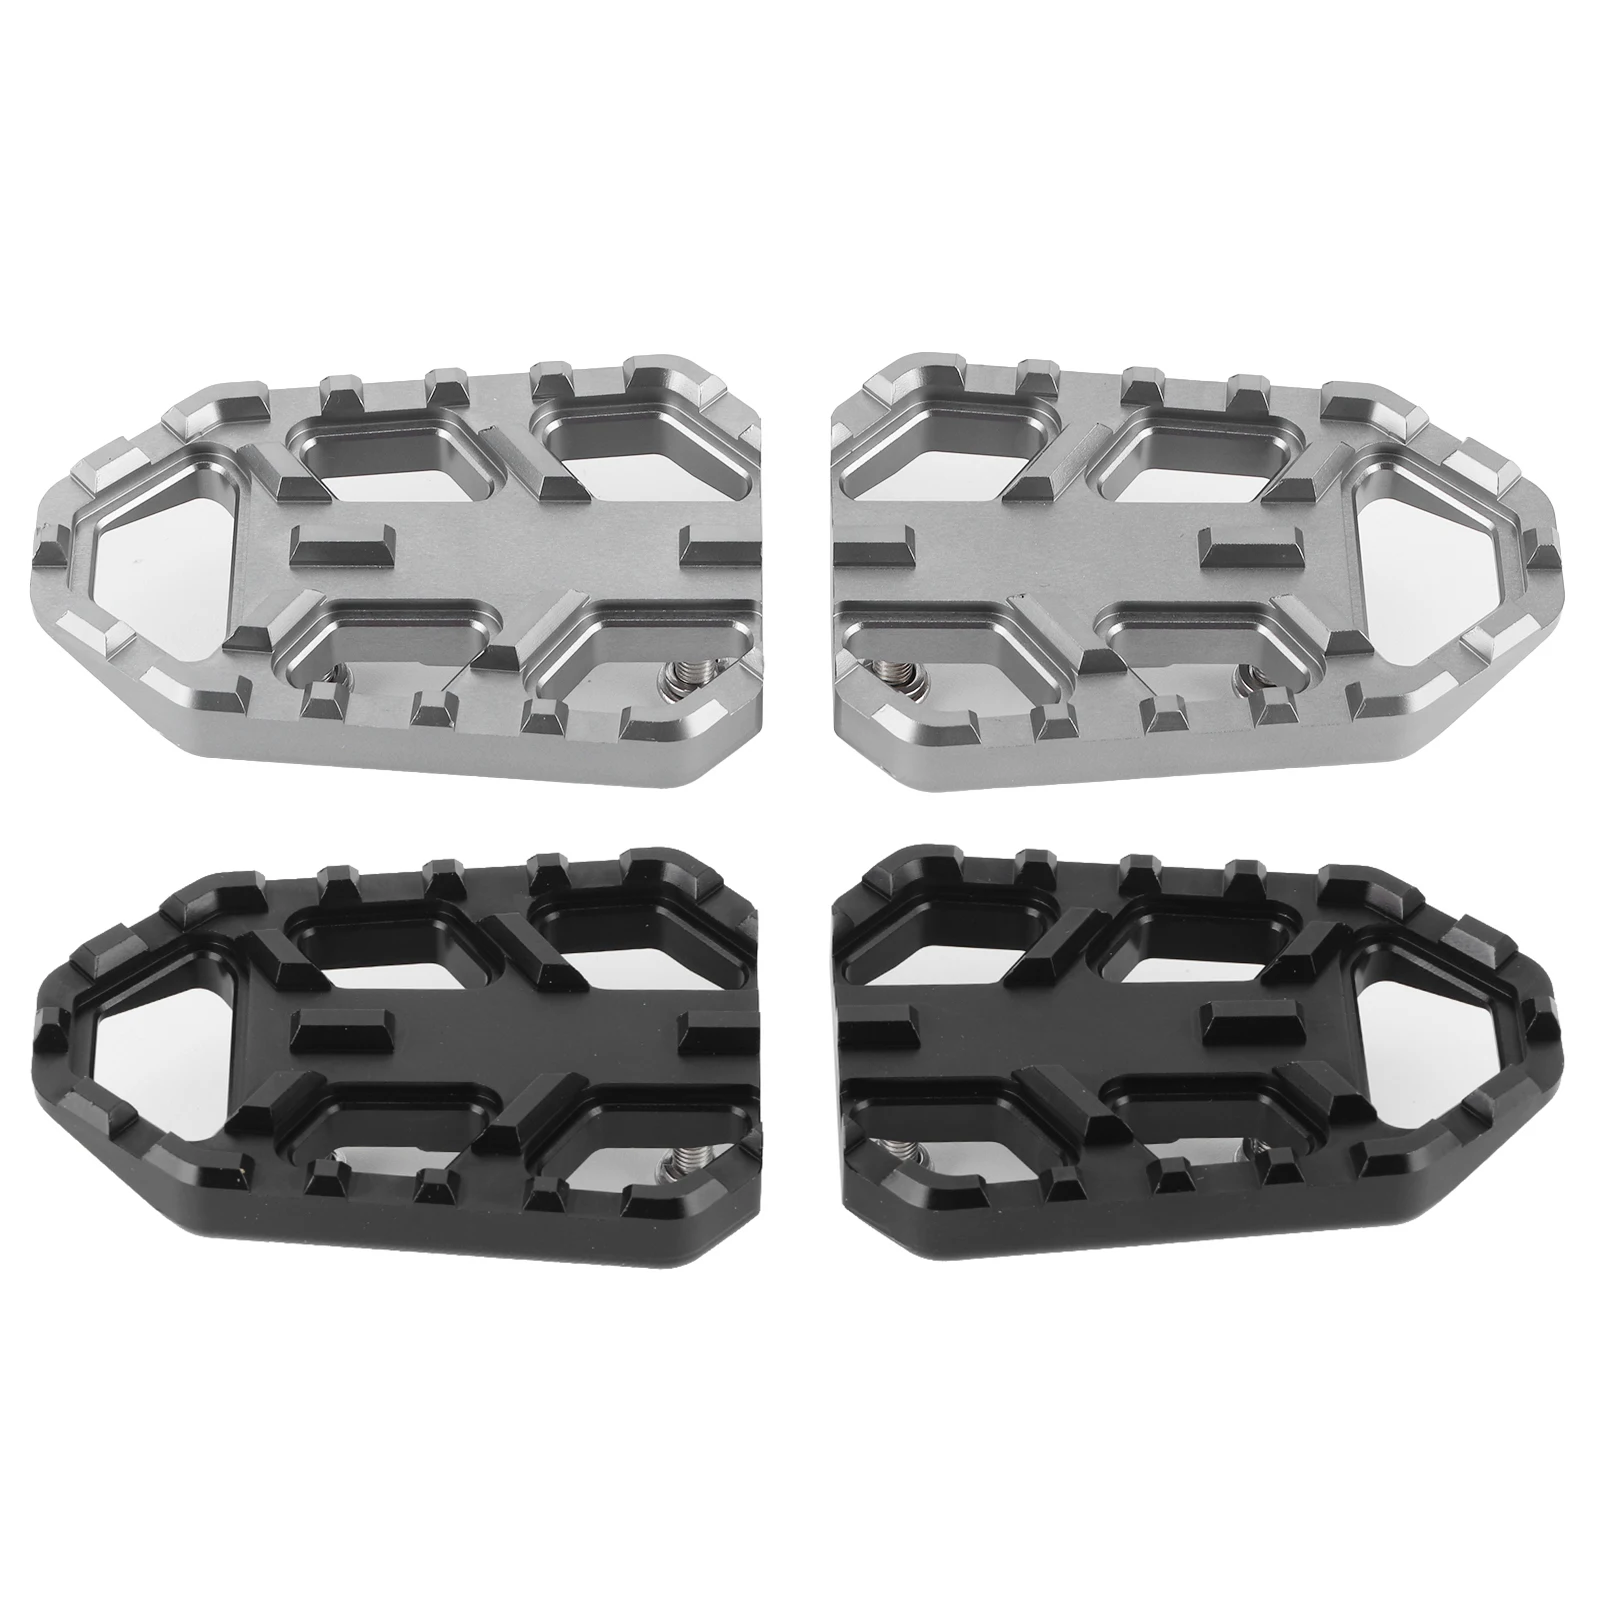 Foot Pegs Cycling Foot Rest Motorcycle Wide Footrest CNC Aluminum Alloy ... - $28.24